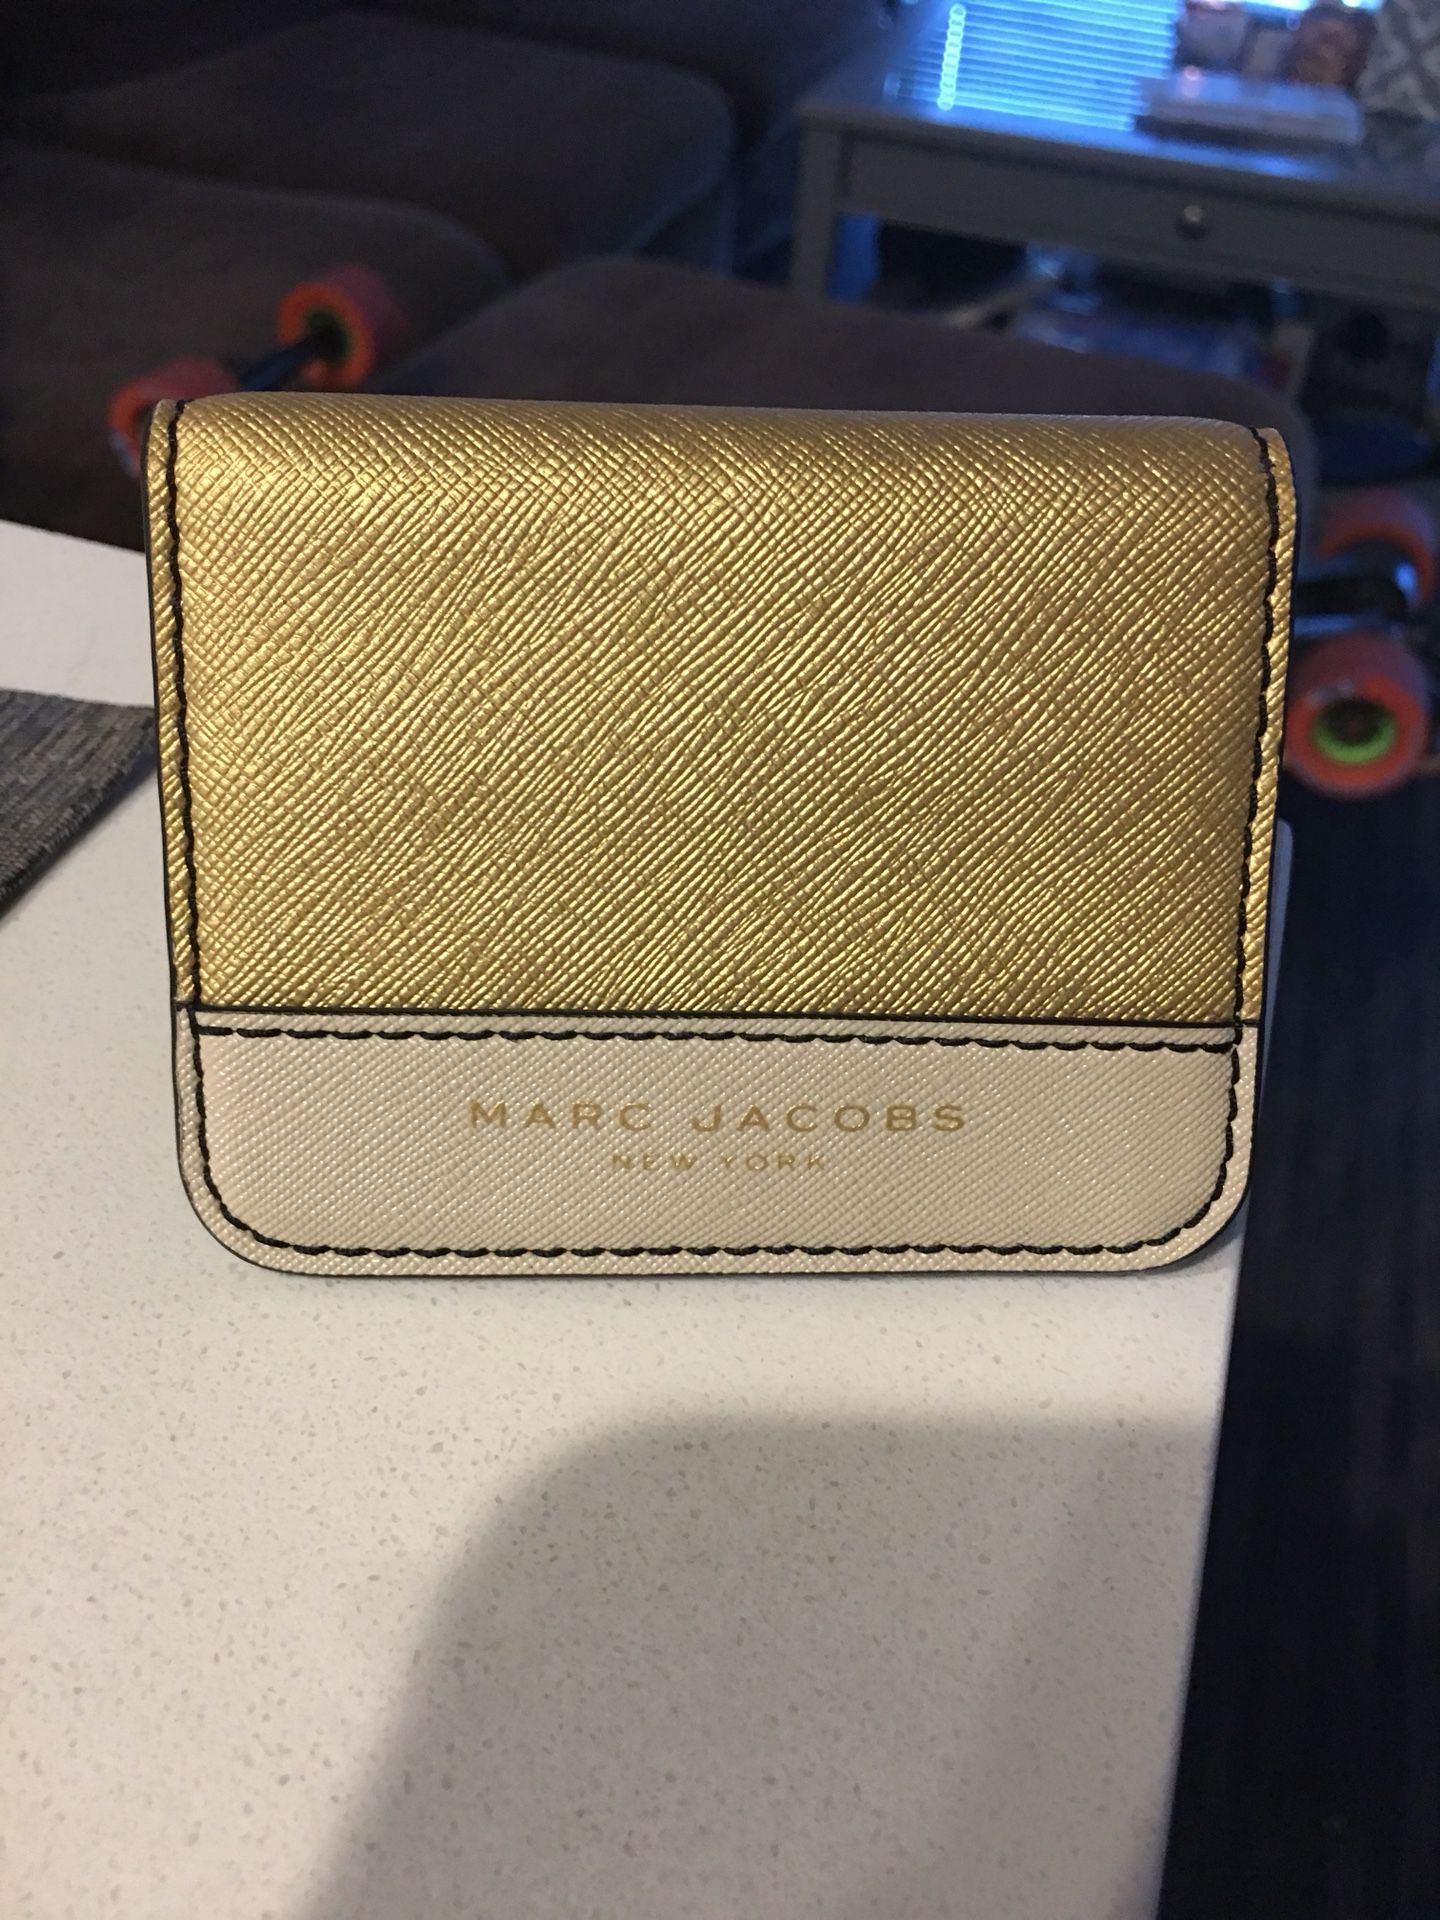 Marc jacobs card wallet